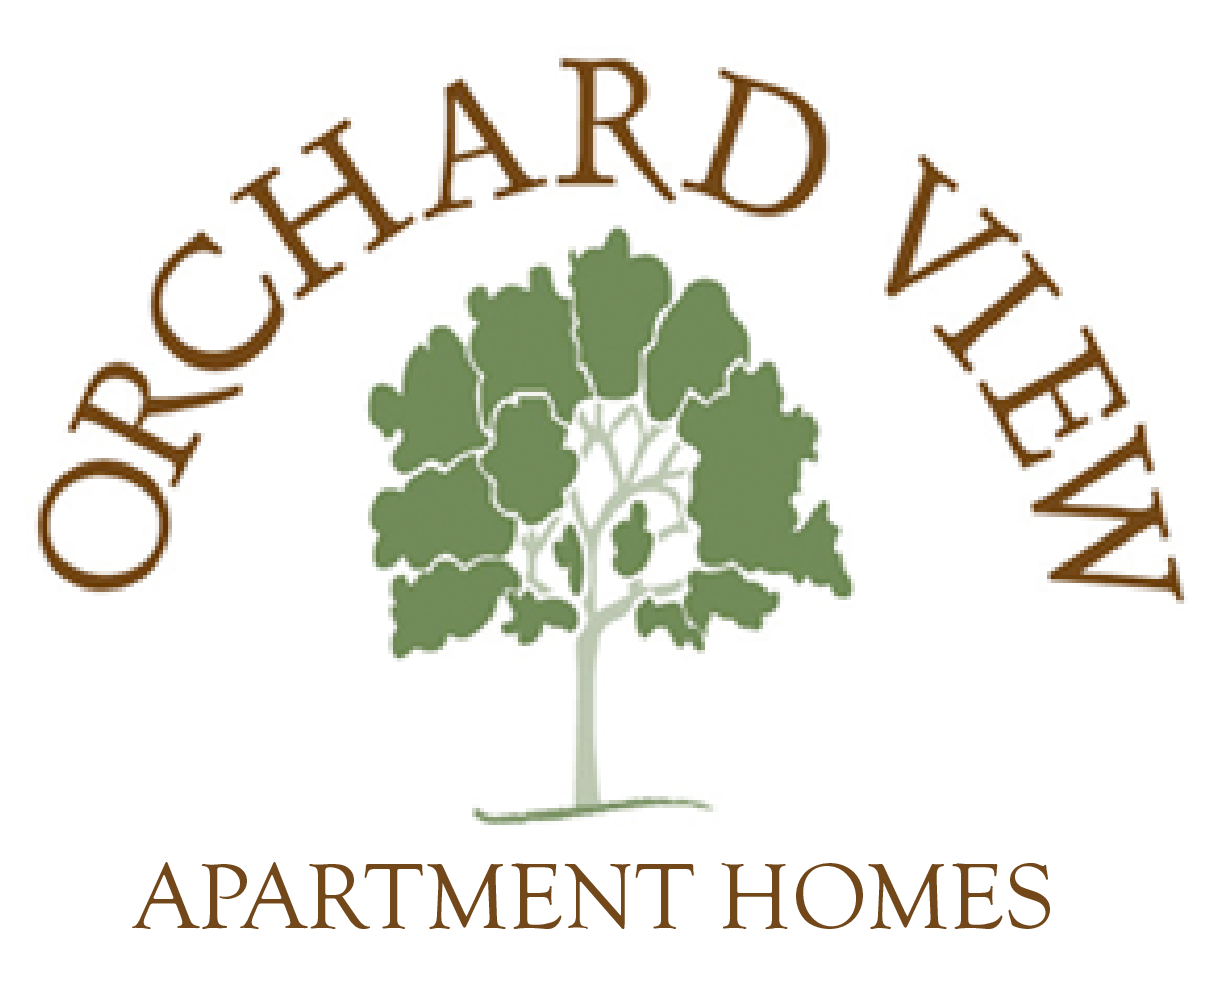 Orchard View Apartment Homes logo